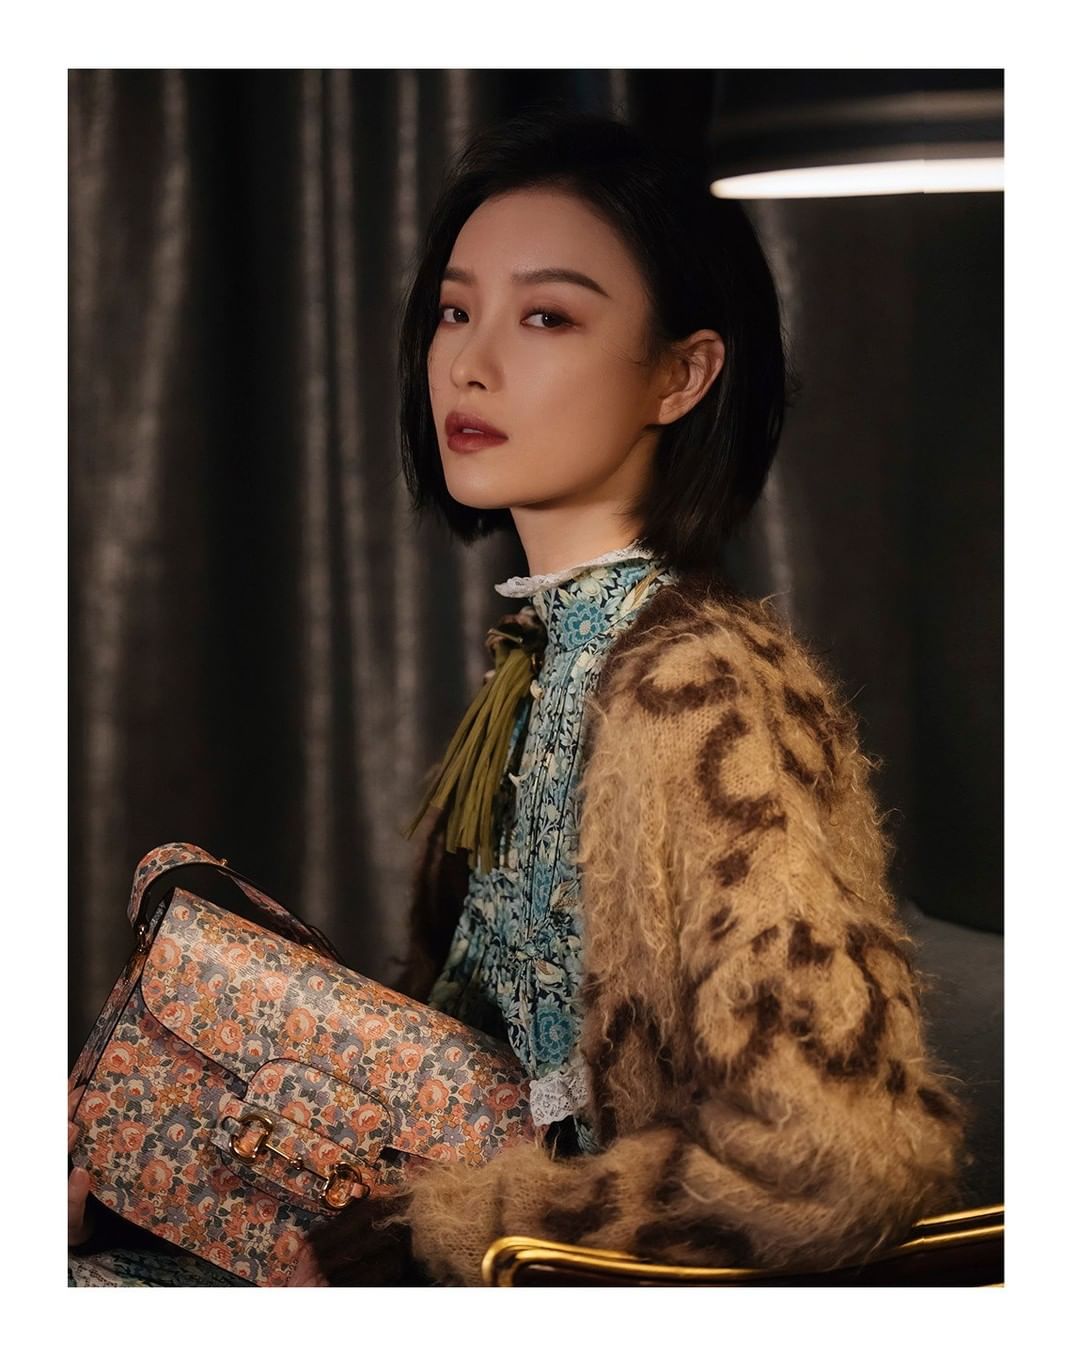 Gucci Official - #NiNi @captainmiao is captured wearing a #GucciFW20 GG jacquard reversible wool cardigan over a crêpe maxi dress and #GucciHorsebit1955 shoulder bag—both special #GucciLiberty pieces...